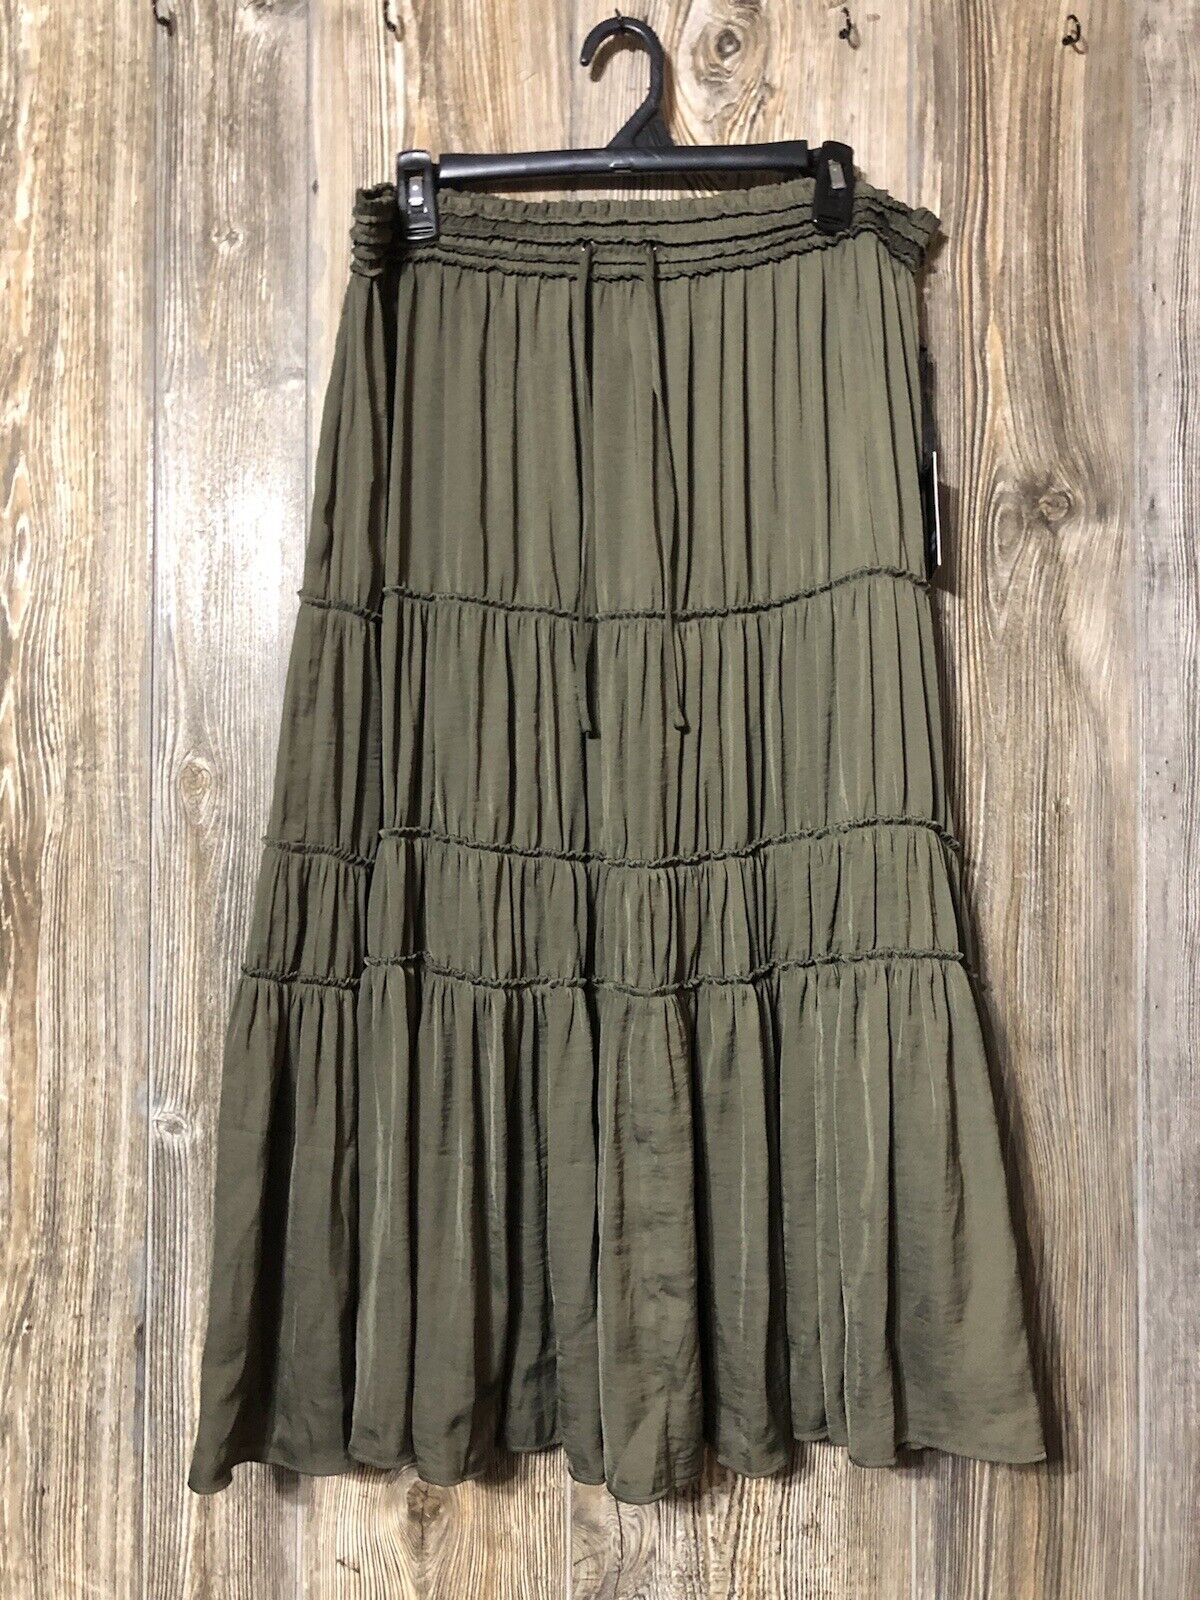 SIMPLY VERA WANG Women\'s PL Tiered GREEN SKIRT Tie Accent SMOCKED WAISTBAND NWT